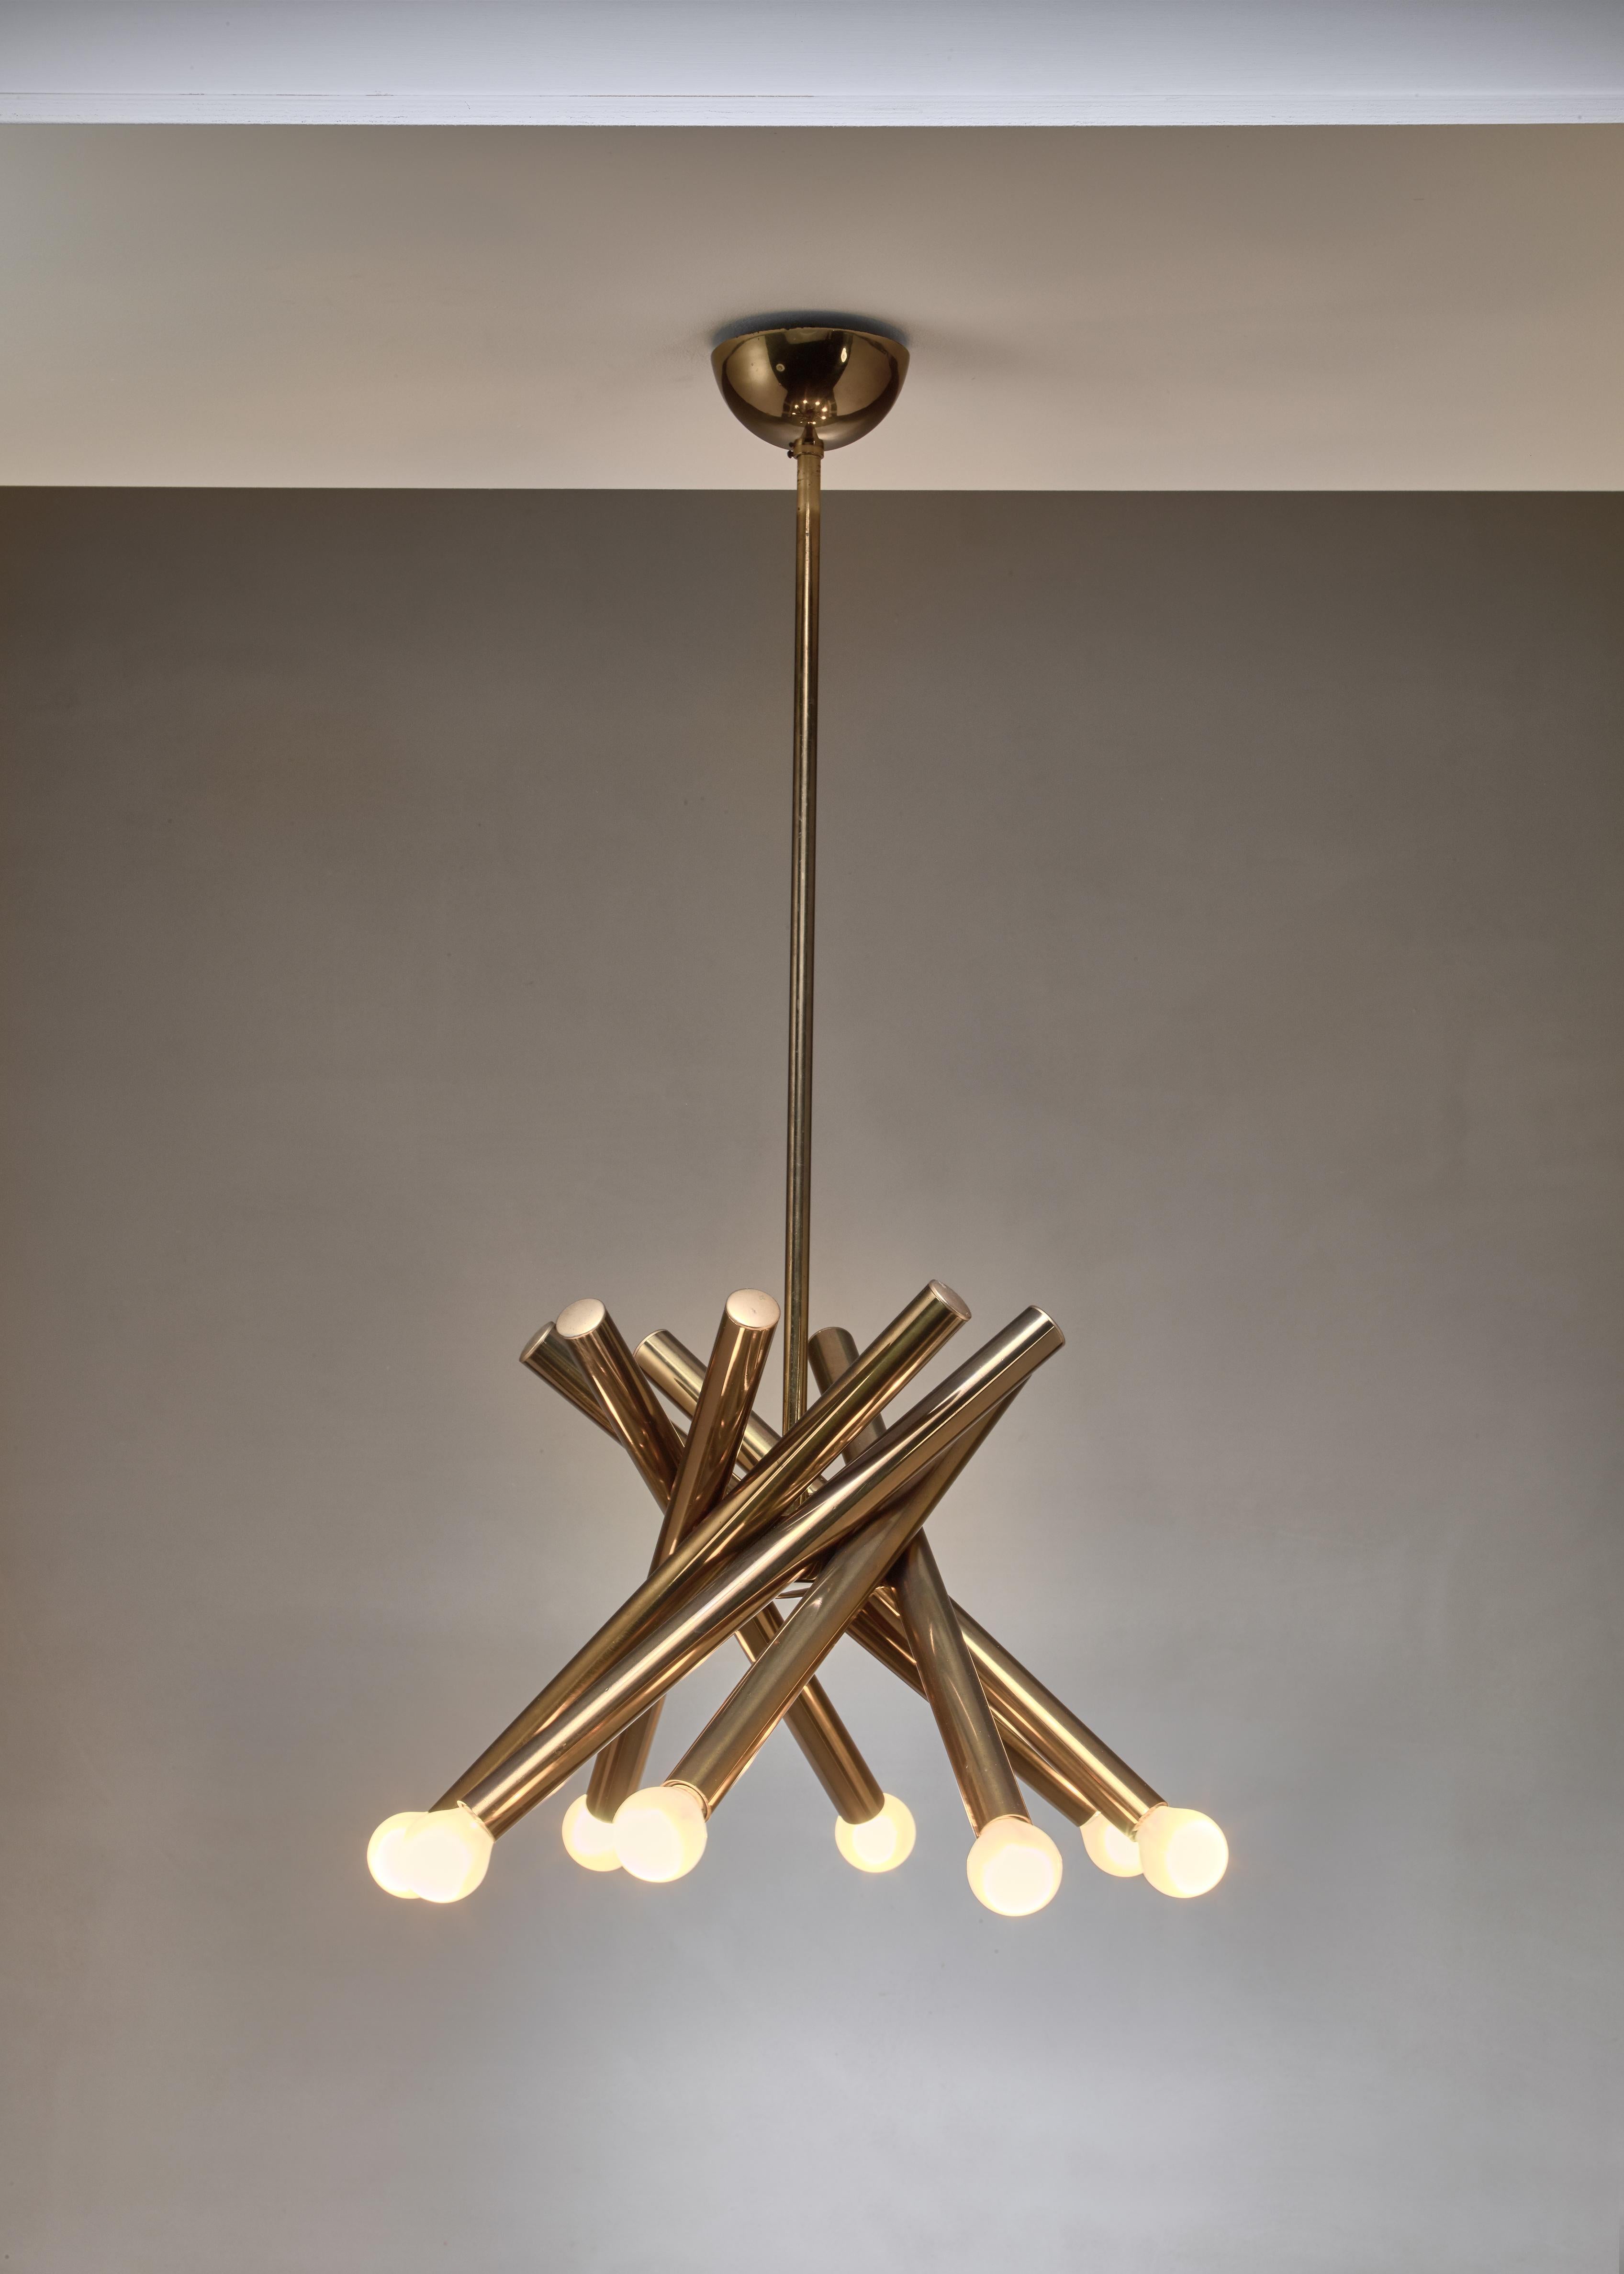 A brass Stilnovo chandelier with eight arms with a light bulb each. The angle of the arms and, with that, the width of the chandelier can be adjusted manually. The total drop of the lamp is 82 cm.